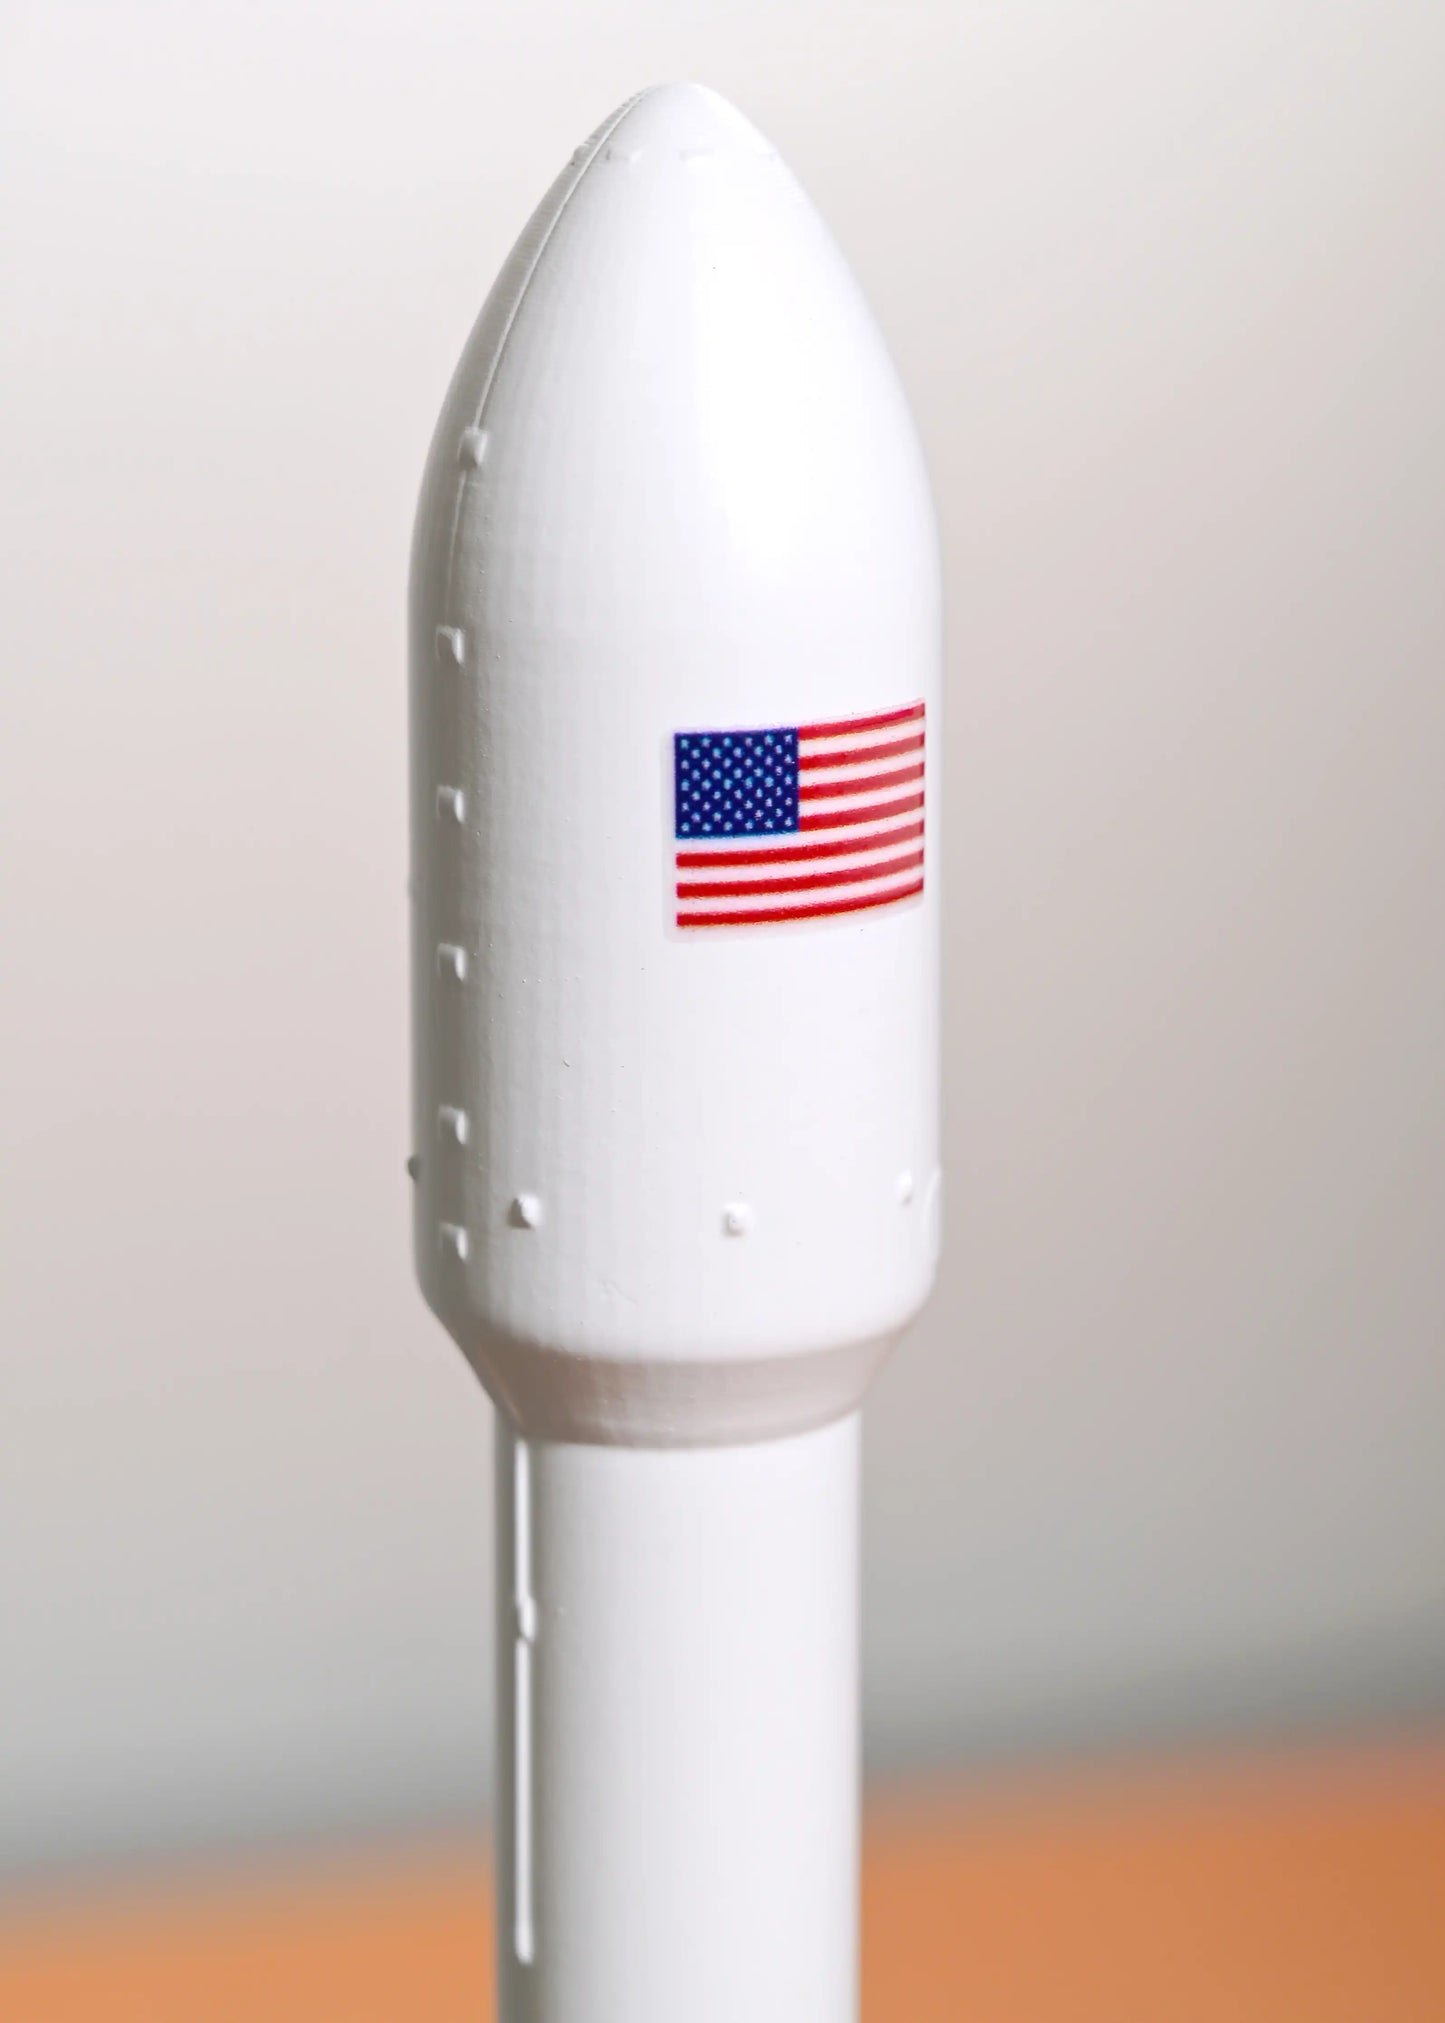 SpaceX Falcon 9 main fairing with the US flag